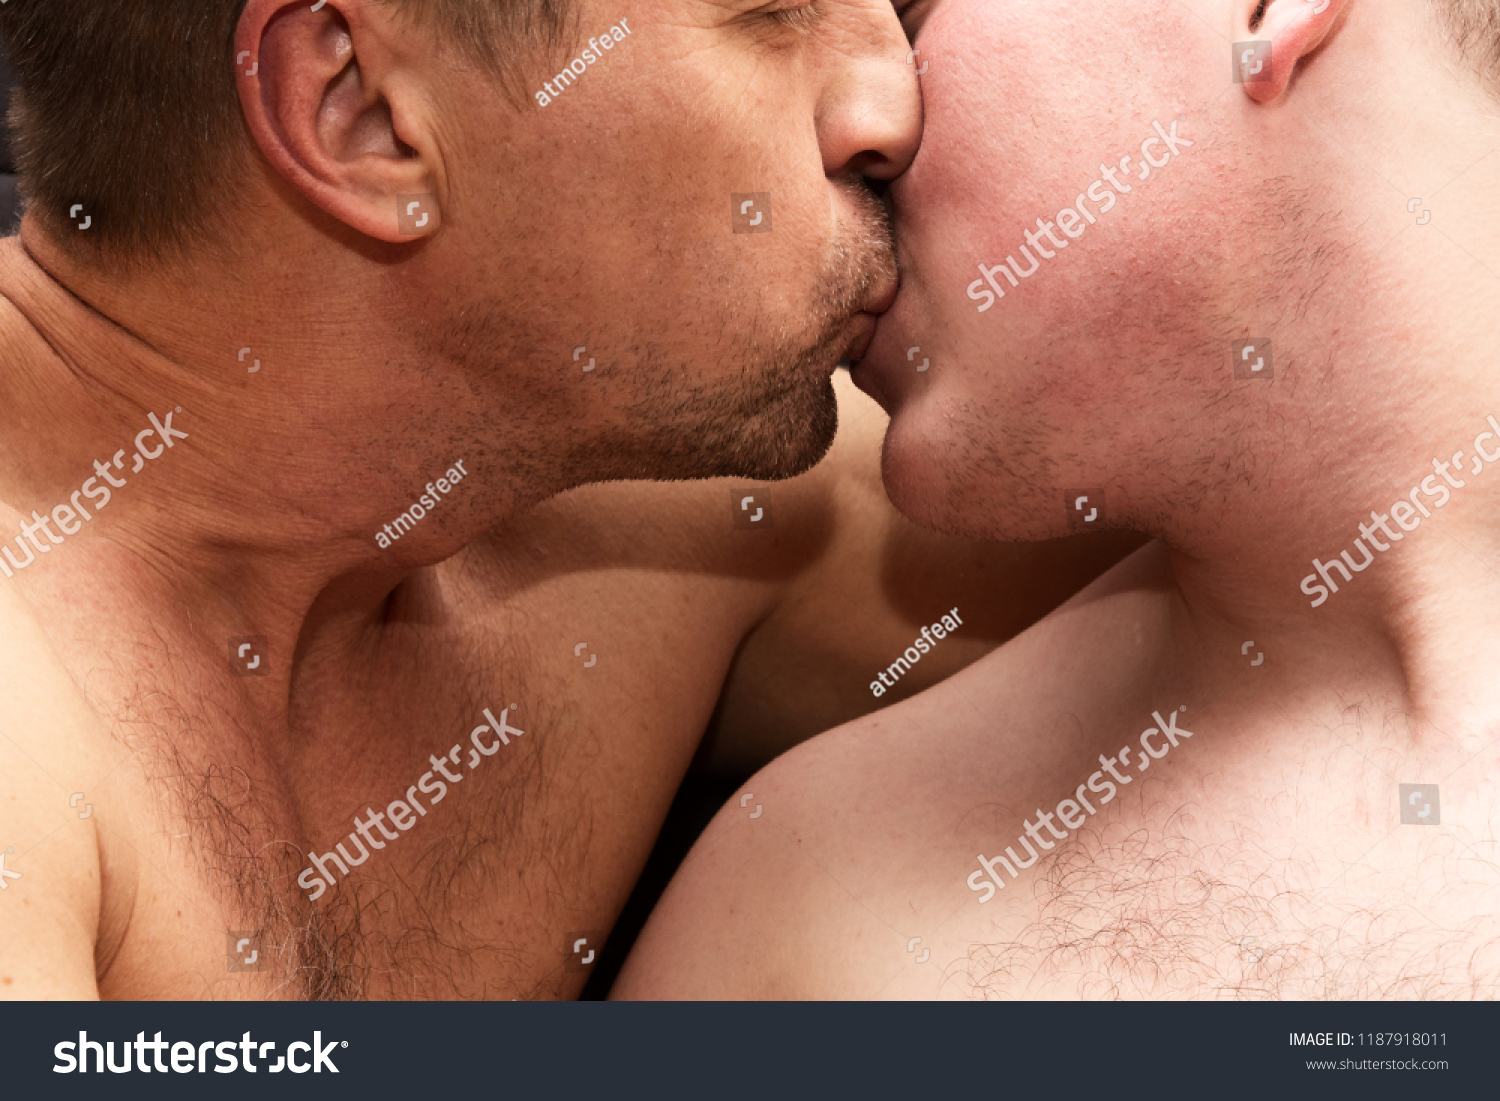 2 guys making out